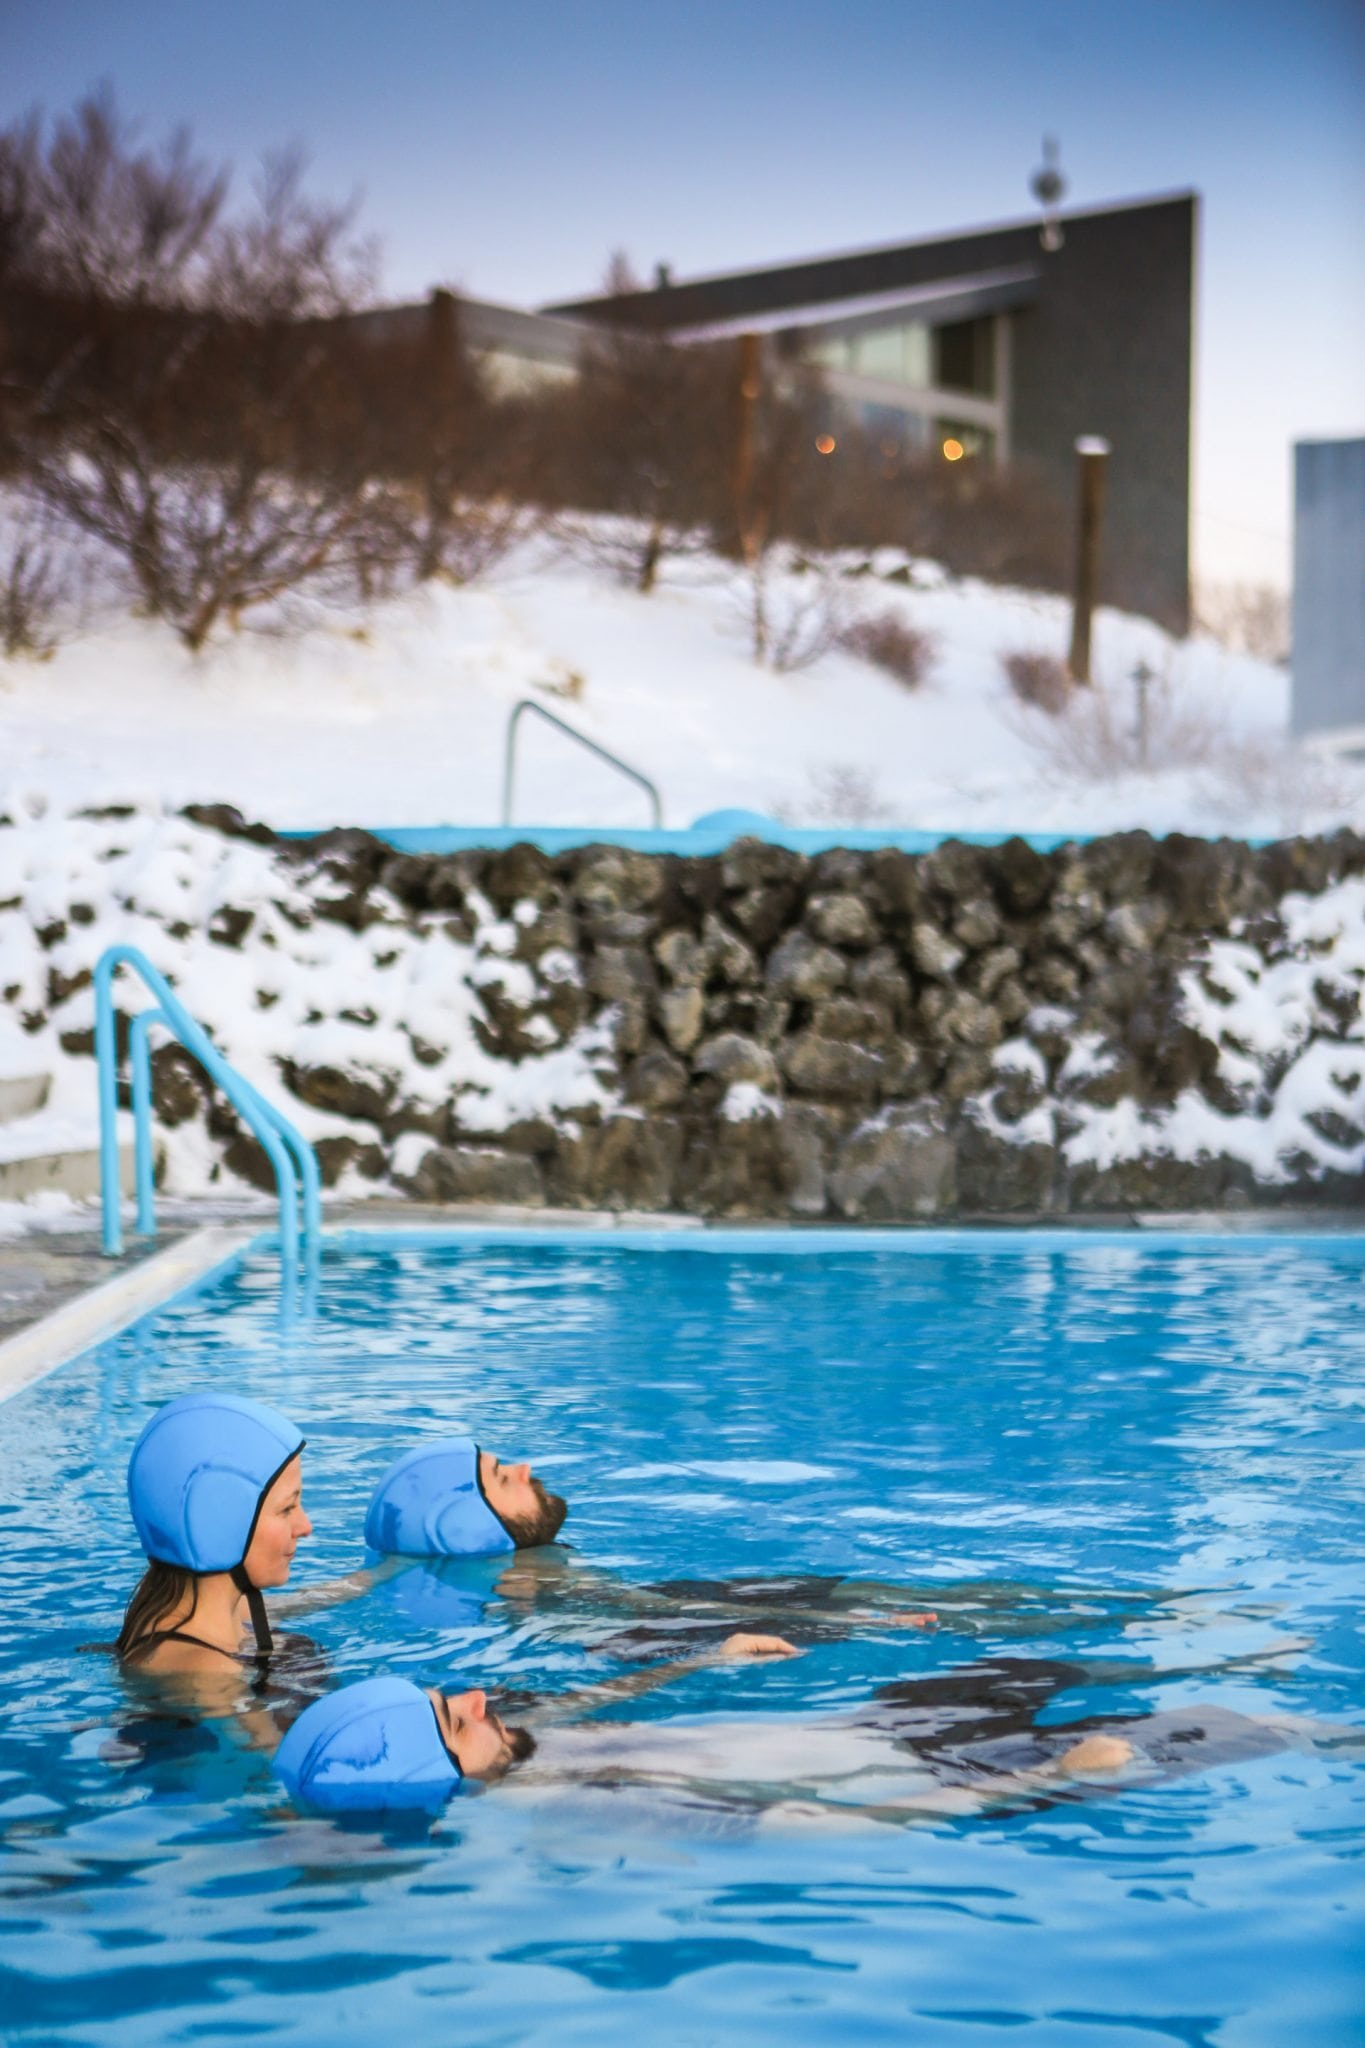 people swimming in an geothermal pool in winter